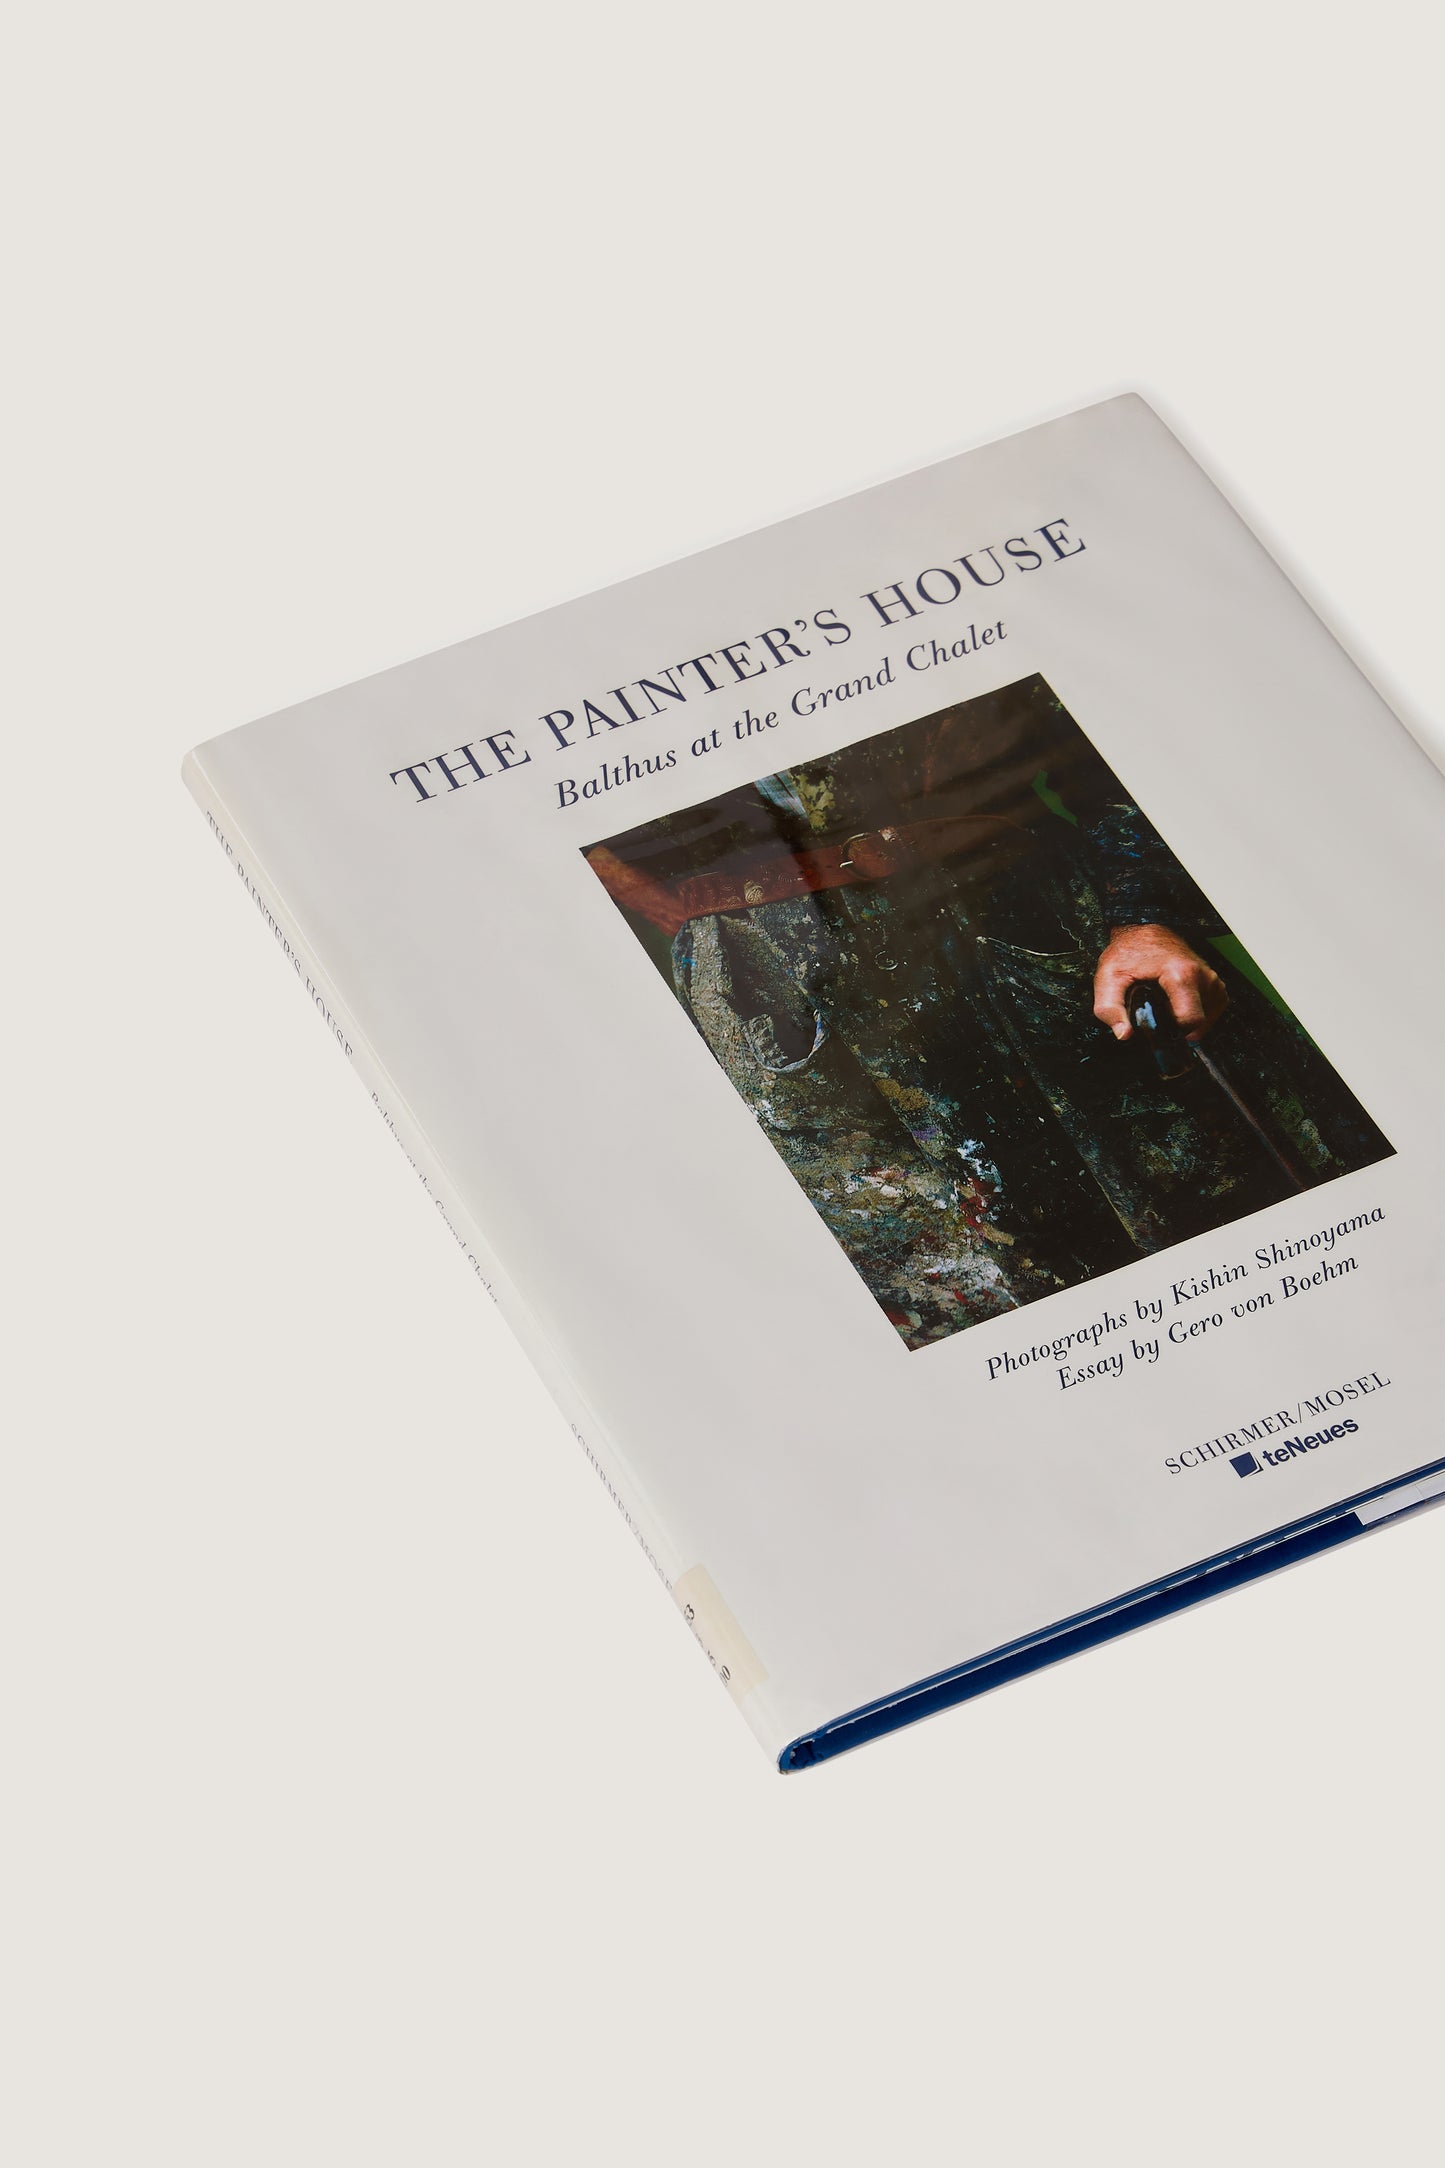 BOOK "THE PAINTER'S HOUSE : BALTHUS AT THE GRAND CHALET"